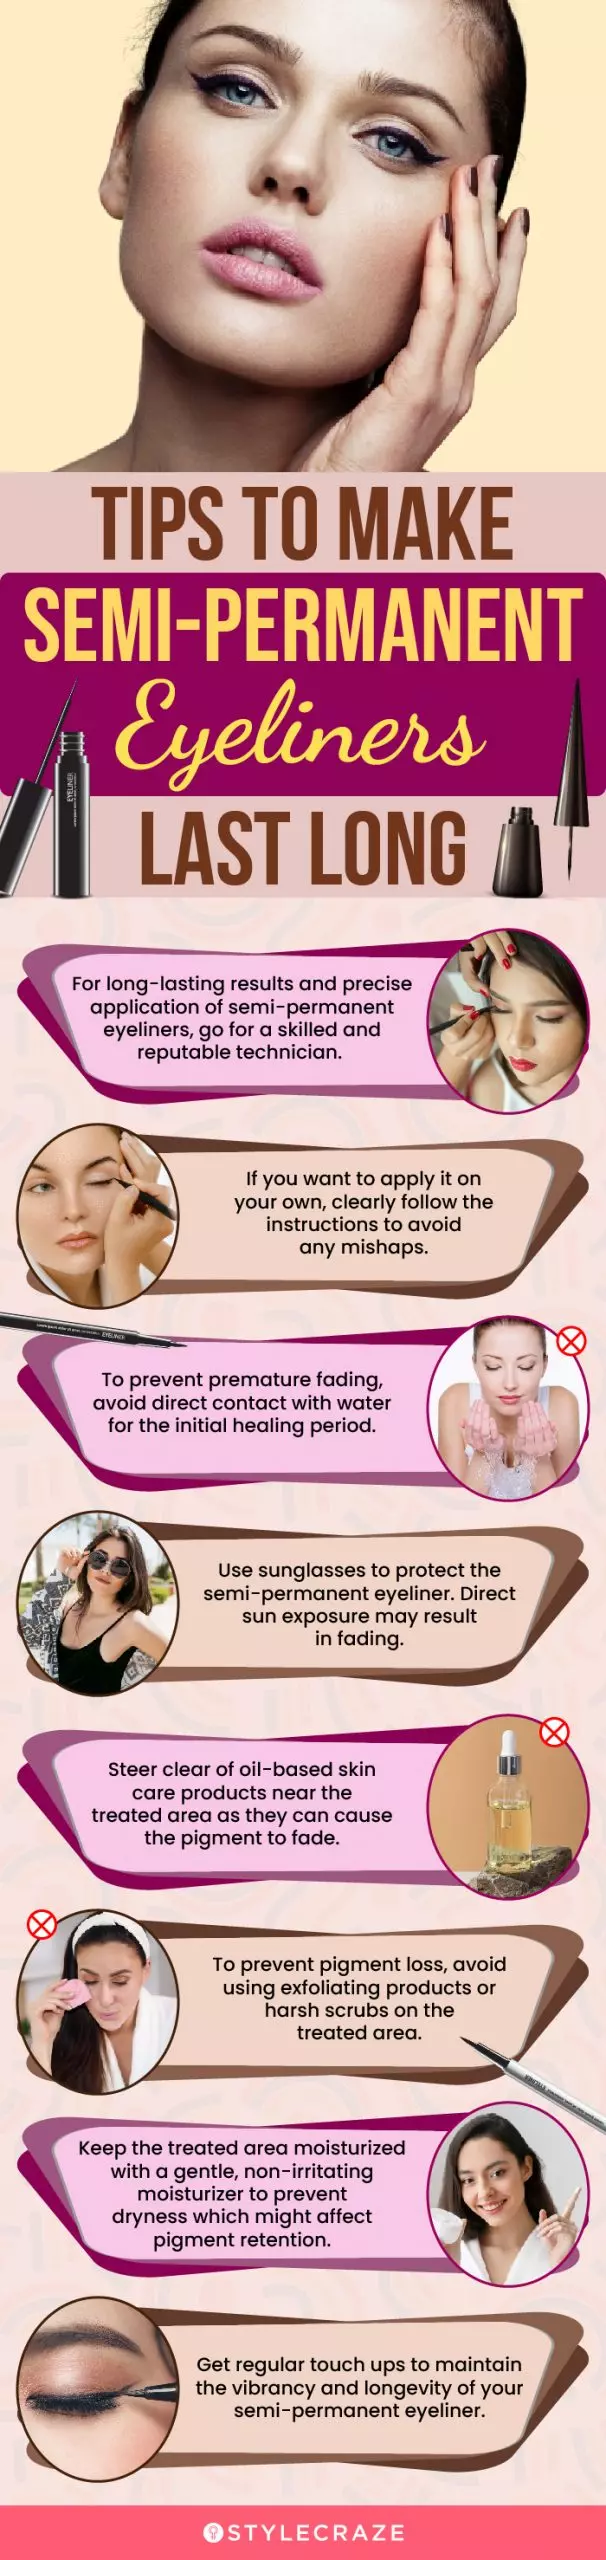 Tips To Make Semi-Permanent Eyeliners Last Long (infographic)